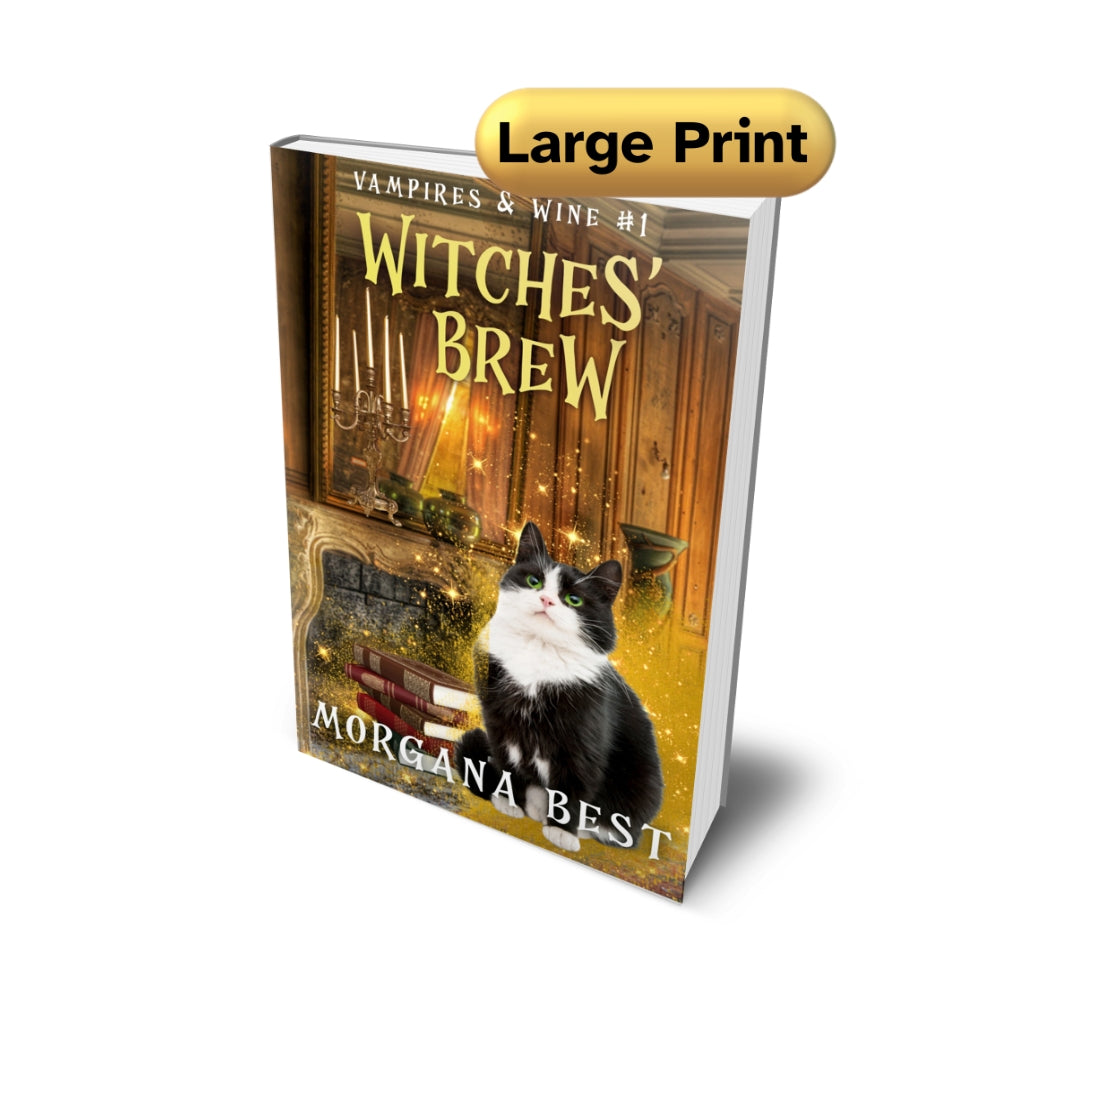 witches brew large print paranormal cozy mystery cozy fantasy morgana best